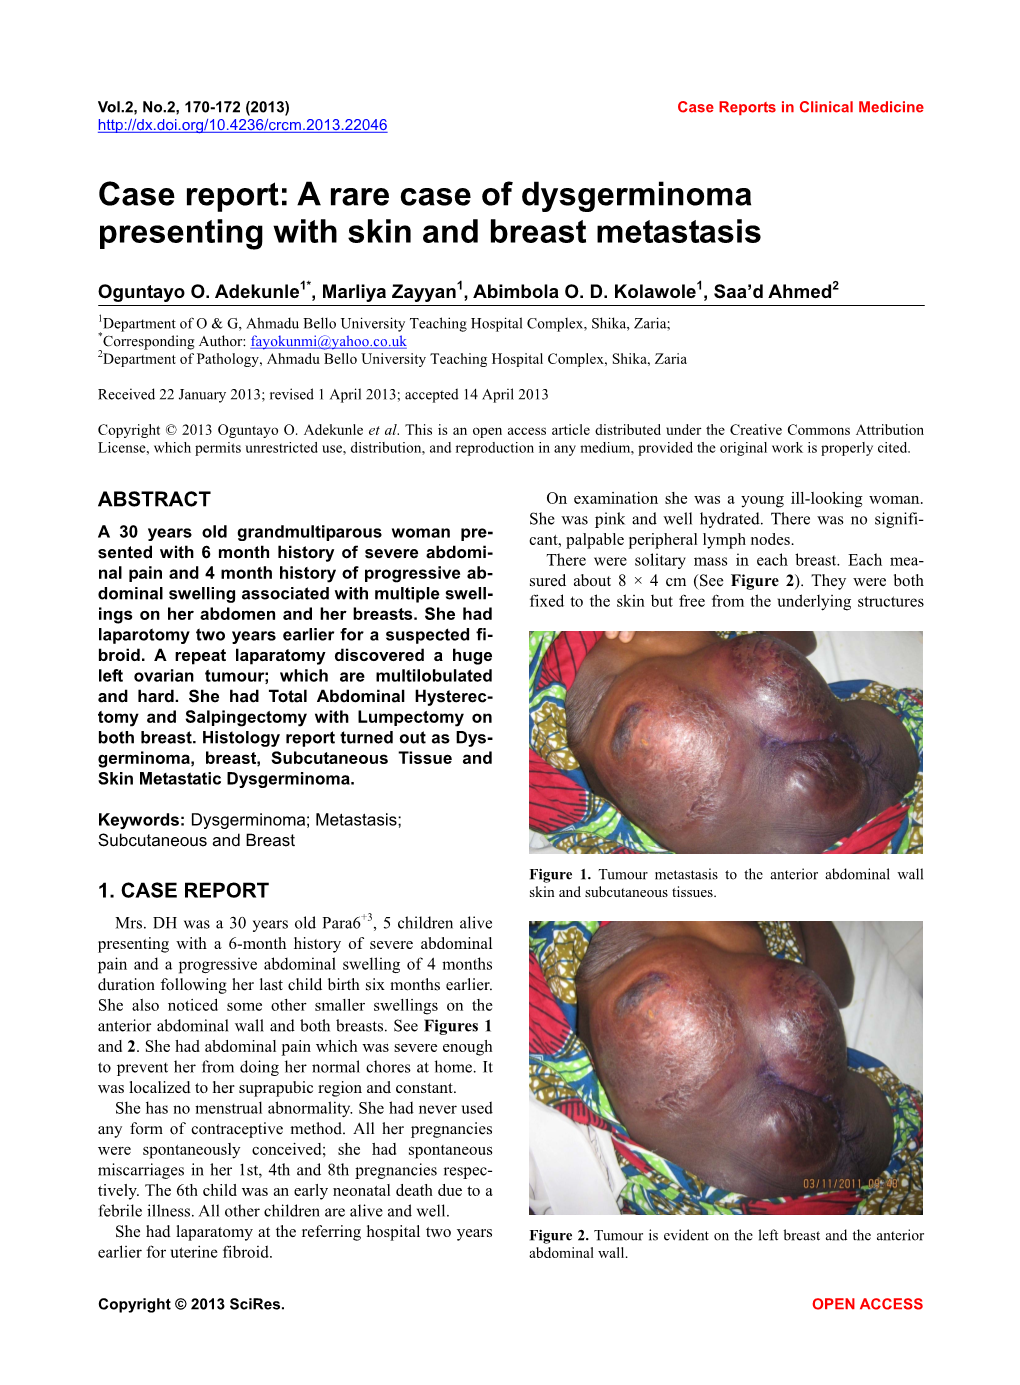 A Rare Case of Dysgerminoma Presenting with Skin and Breast Metastasis